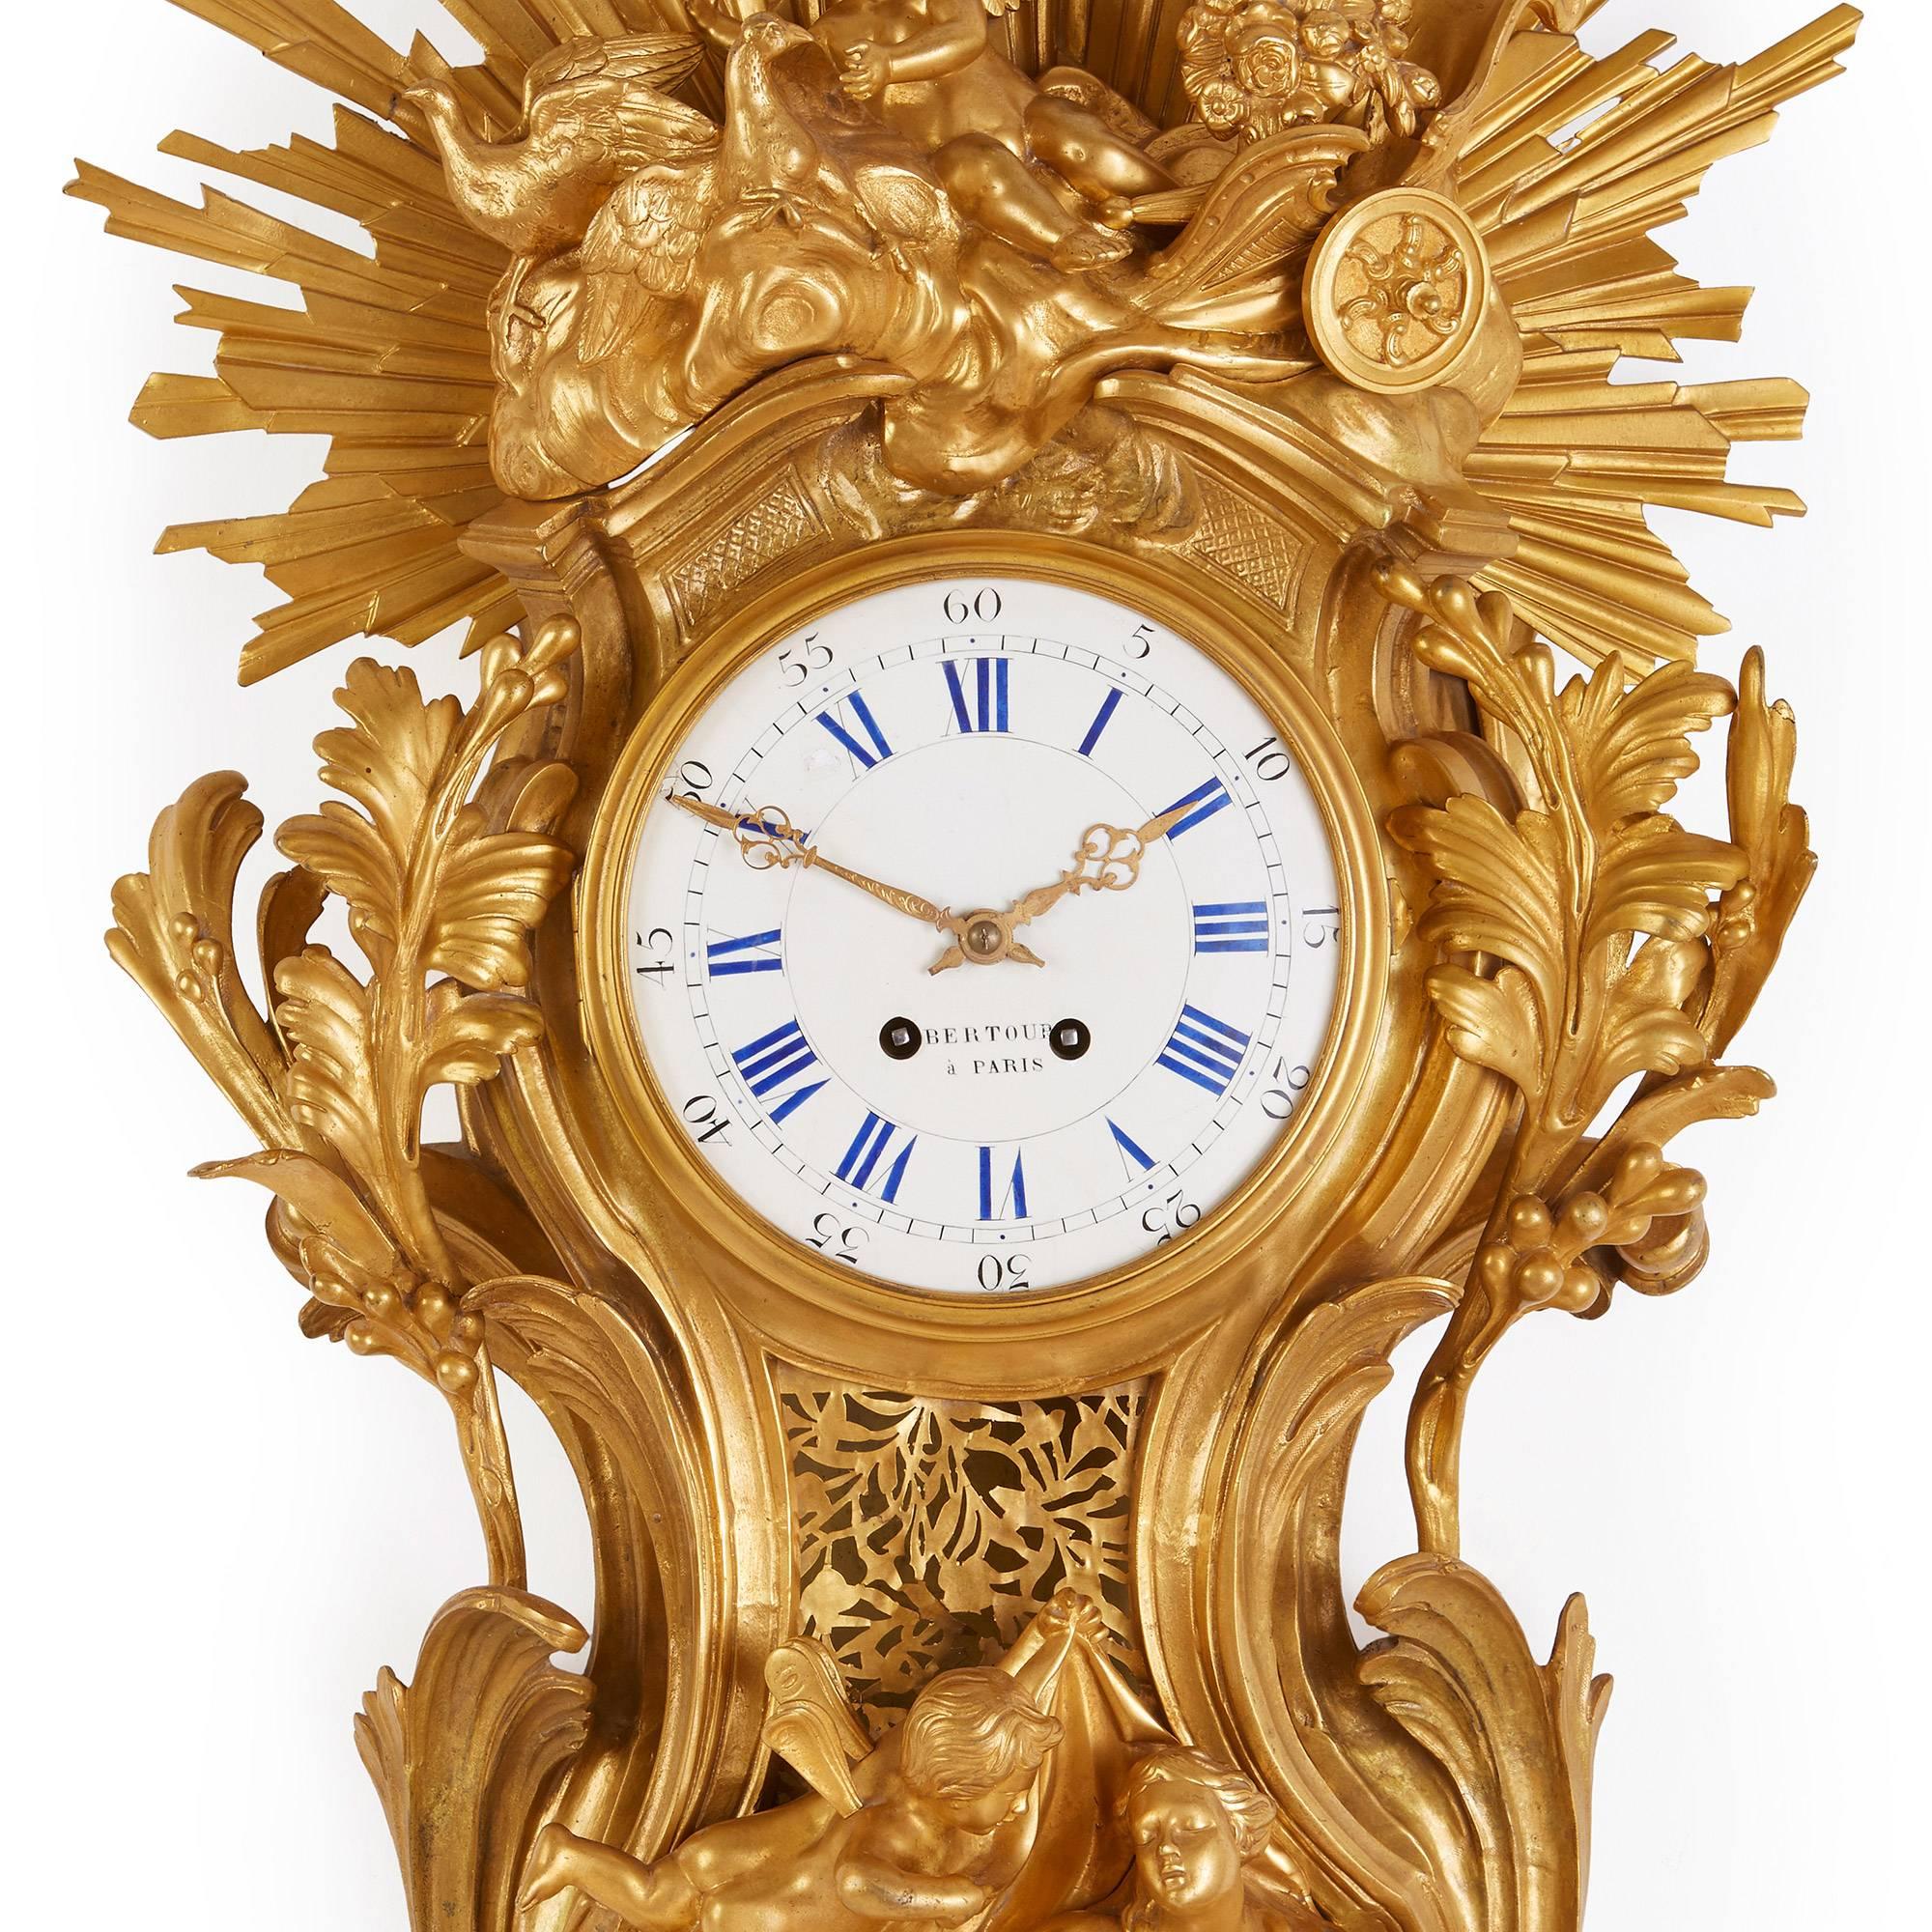 This beautiful Belle Époque style Cartel clock is notable for its stunning depiction of a sunburst, which is depicted in vivid golden gilt bronze. The central circular enamel dial is set within an elaborately detailed ormolu case depicting multiple